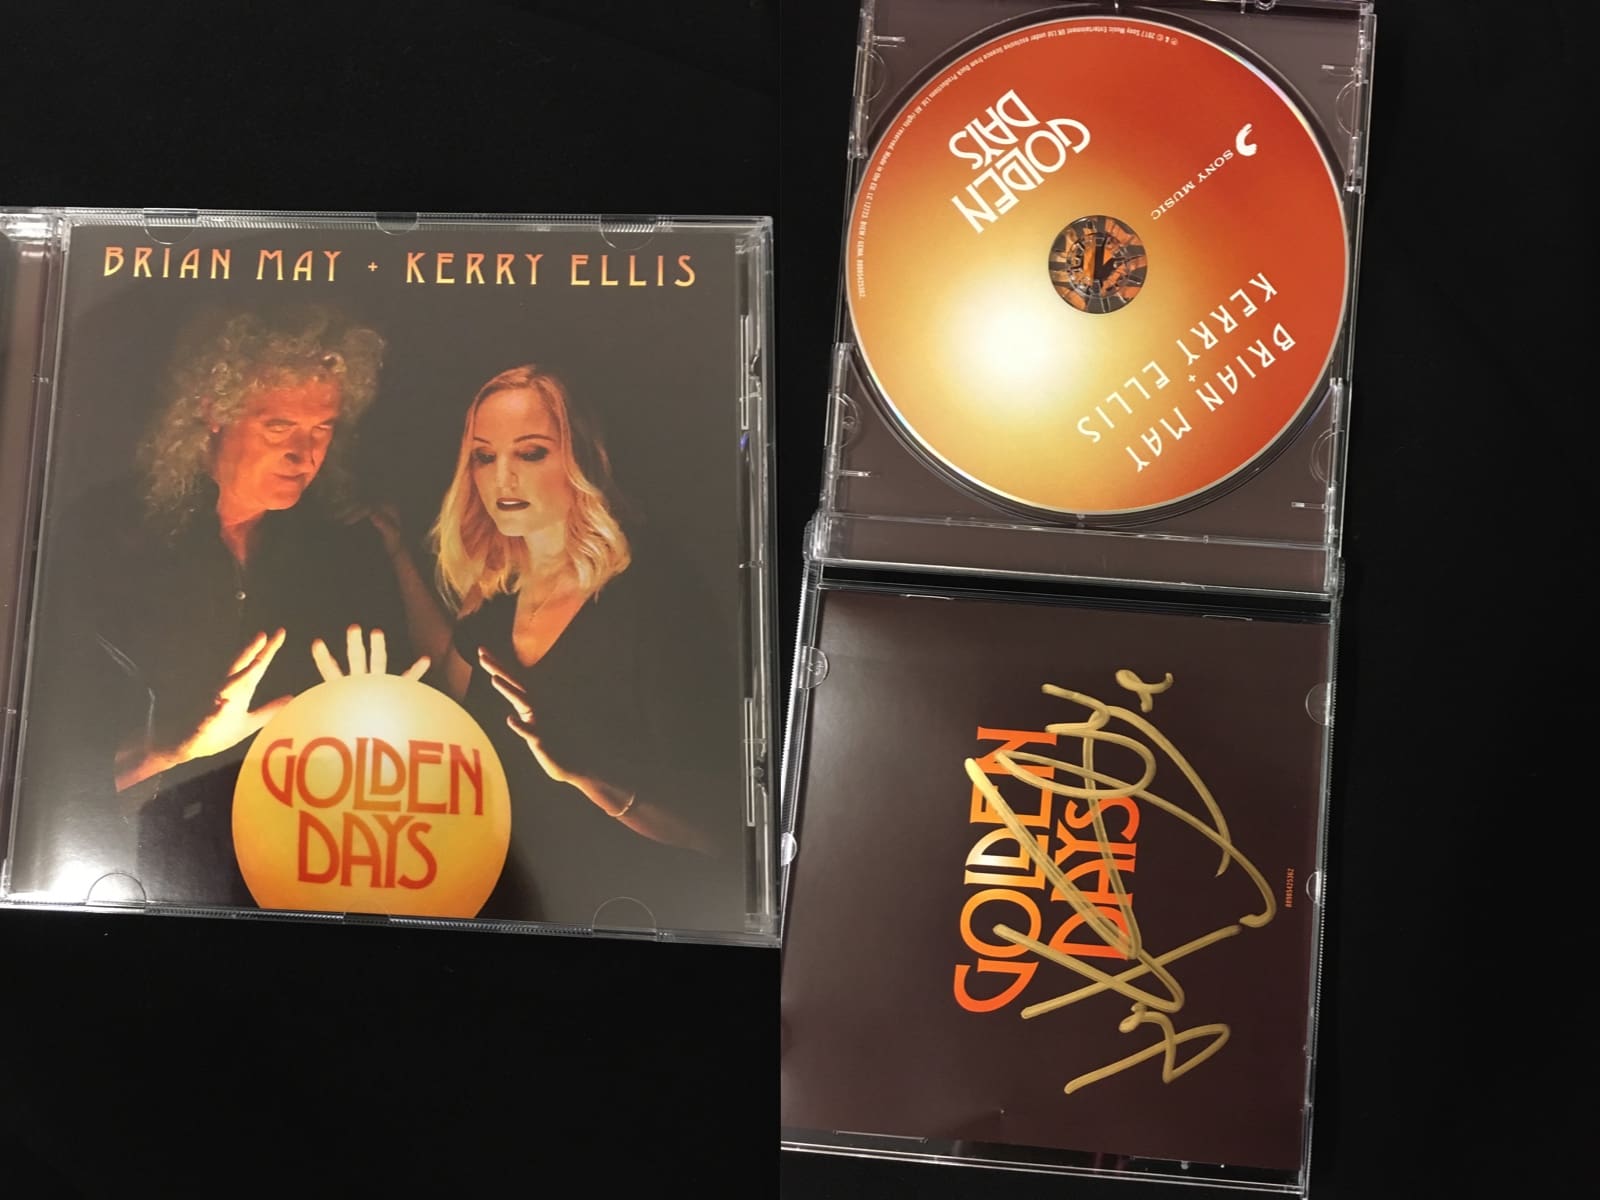 Featured image for “Enter our competition to win a signed Kerry Ellis Golden Days CD”